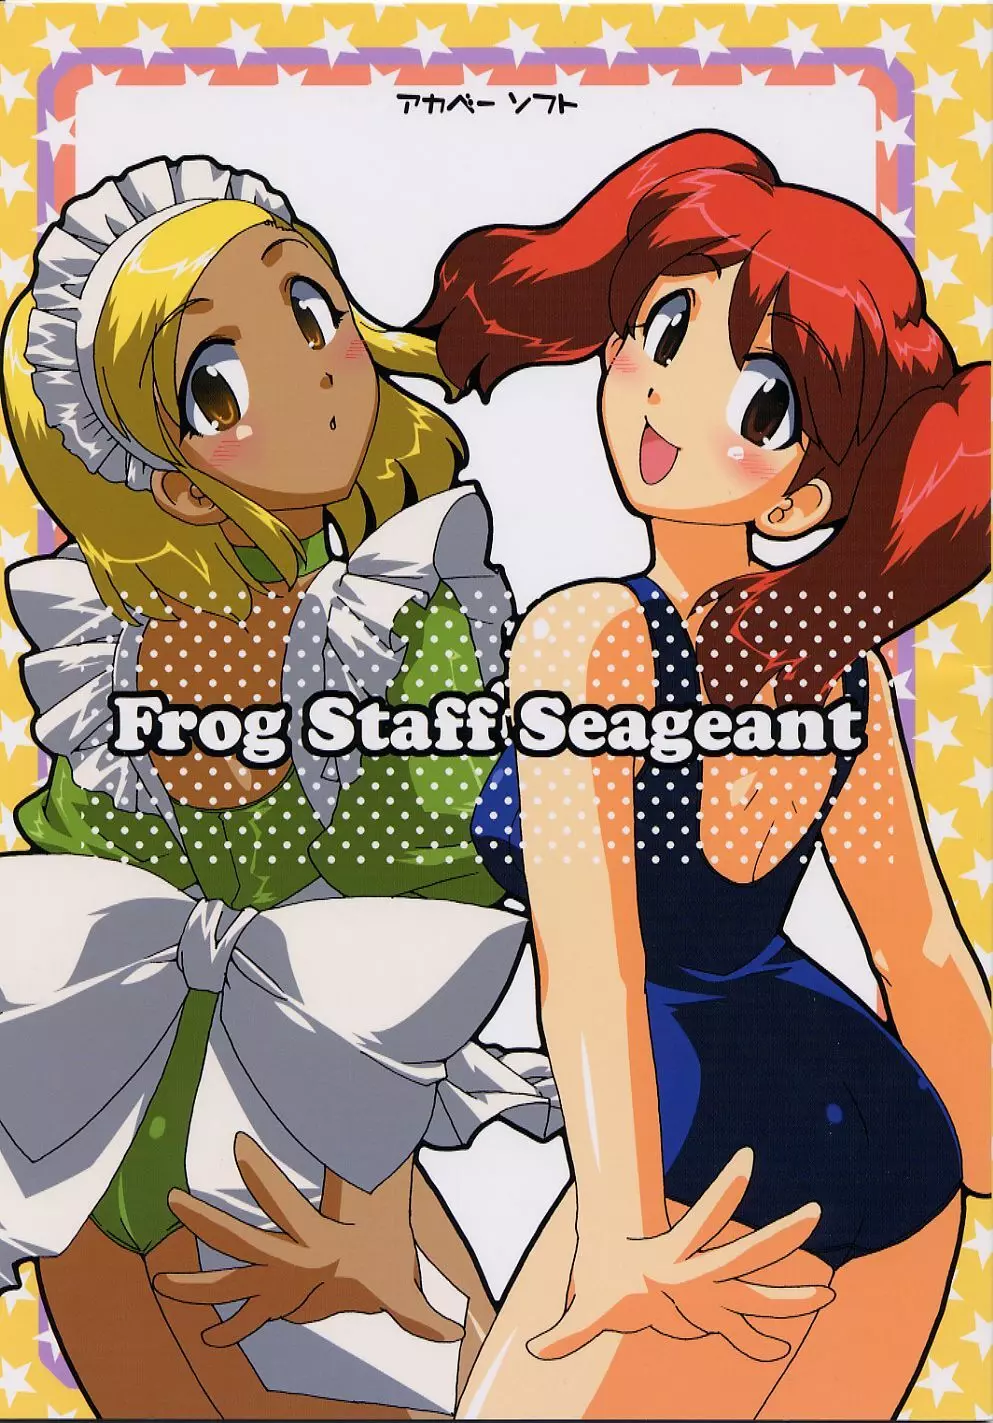 Frog Staff Seageant